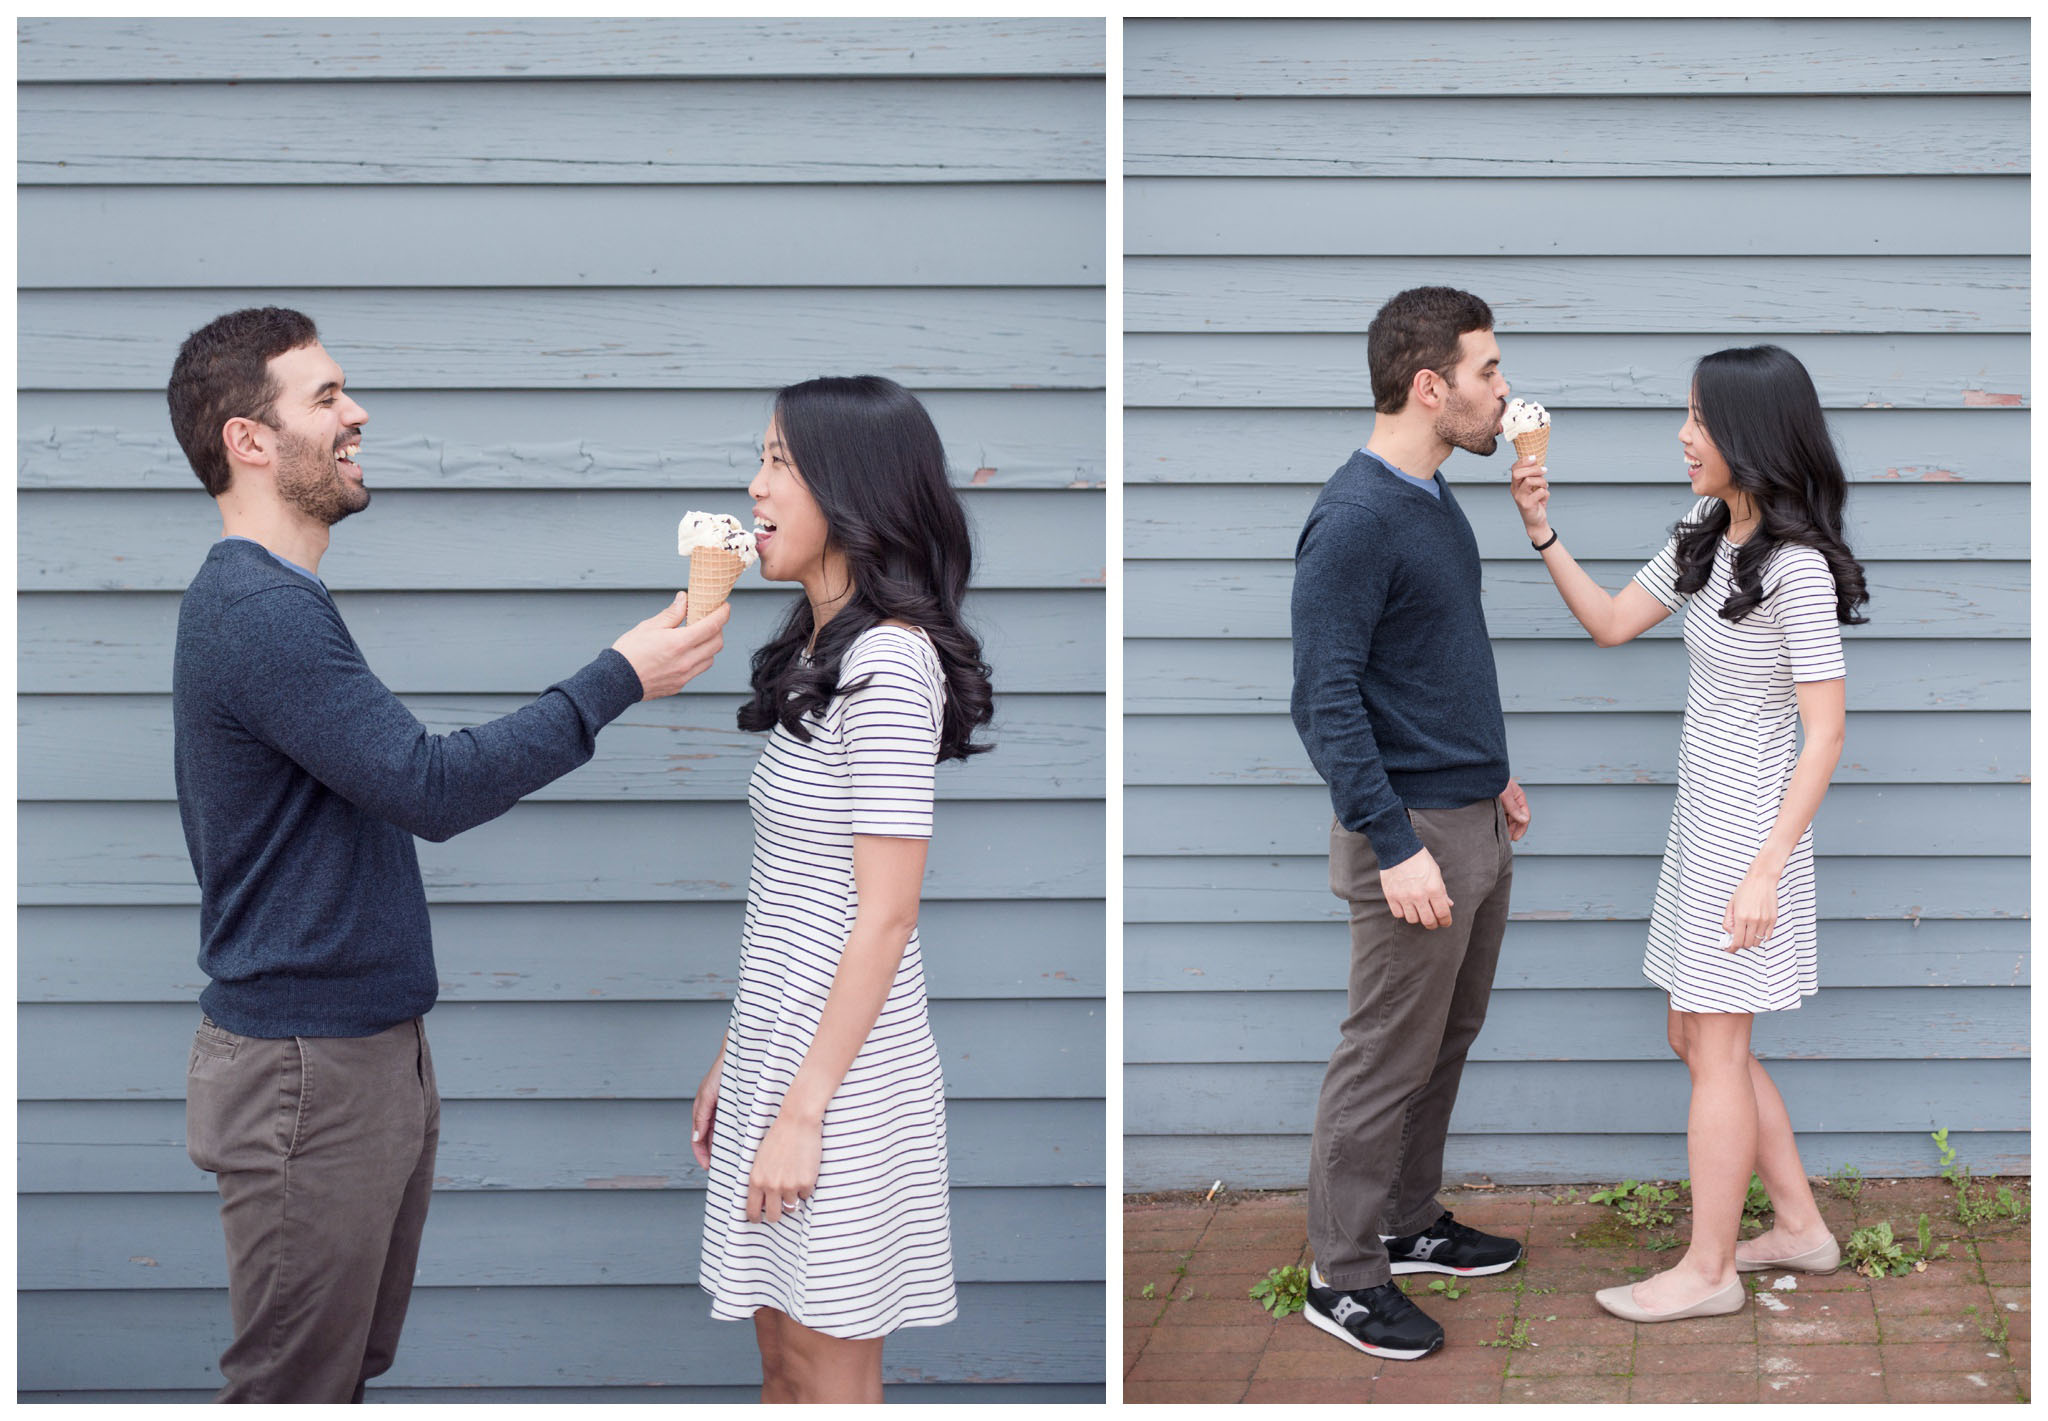 cold spring putnam county engagement photographer hudson valley ny ice cream cones